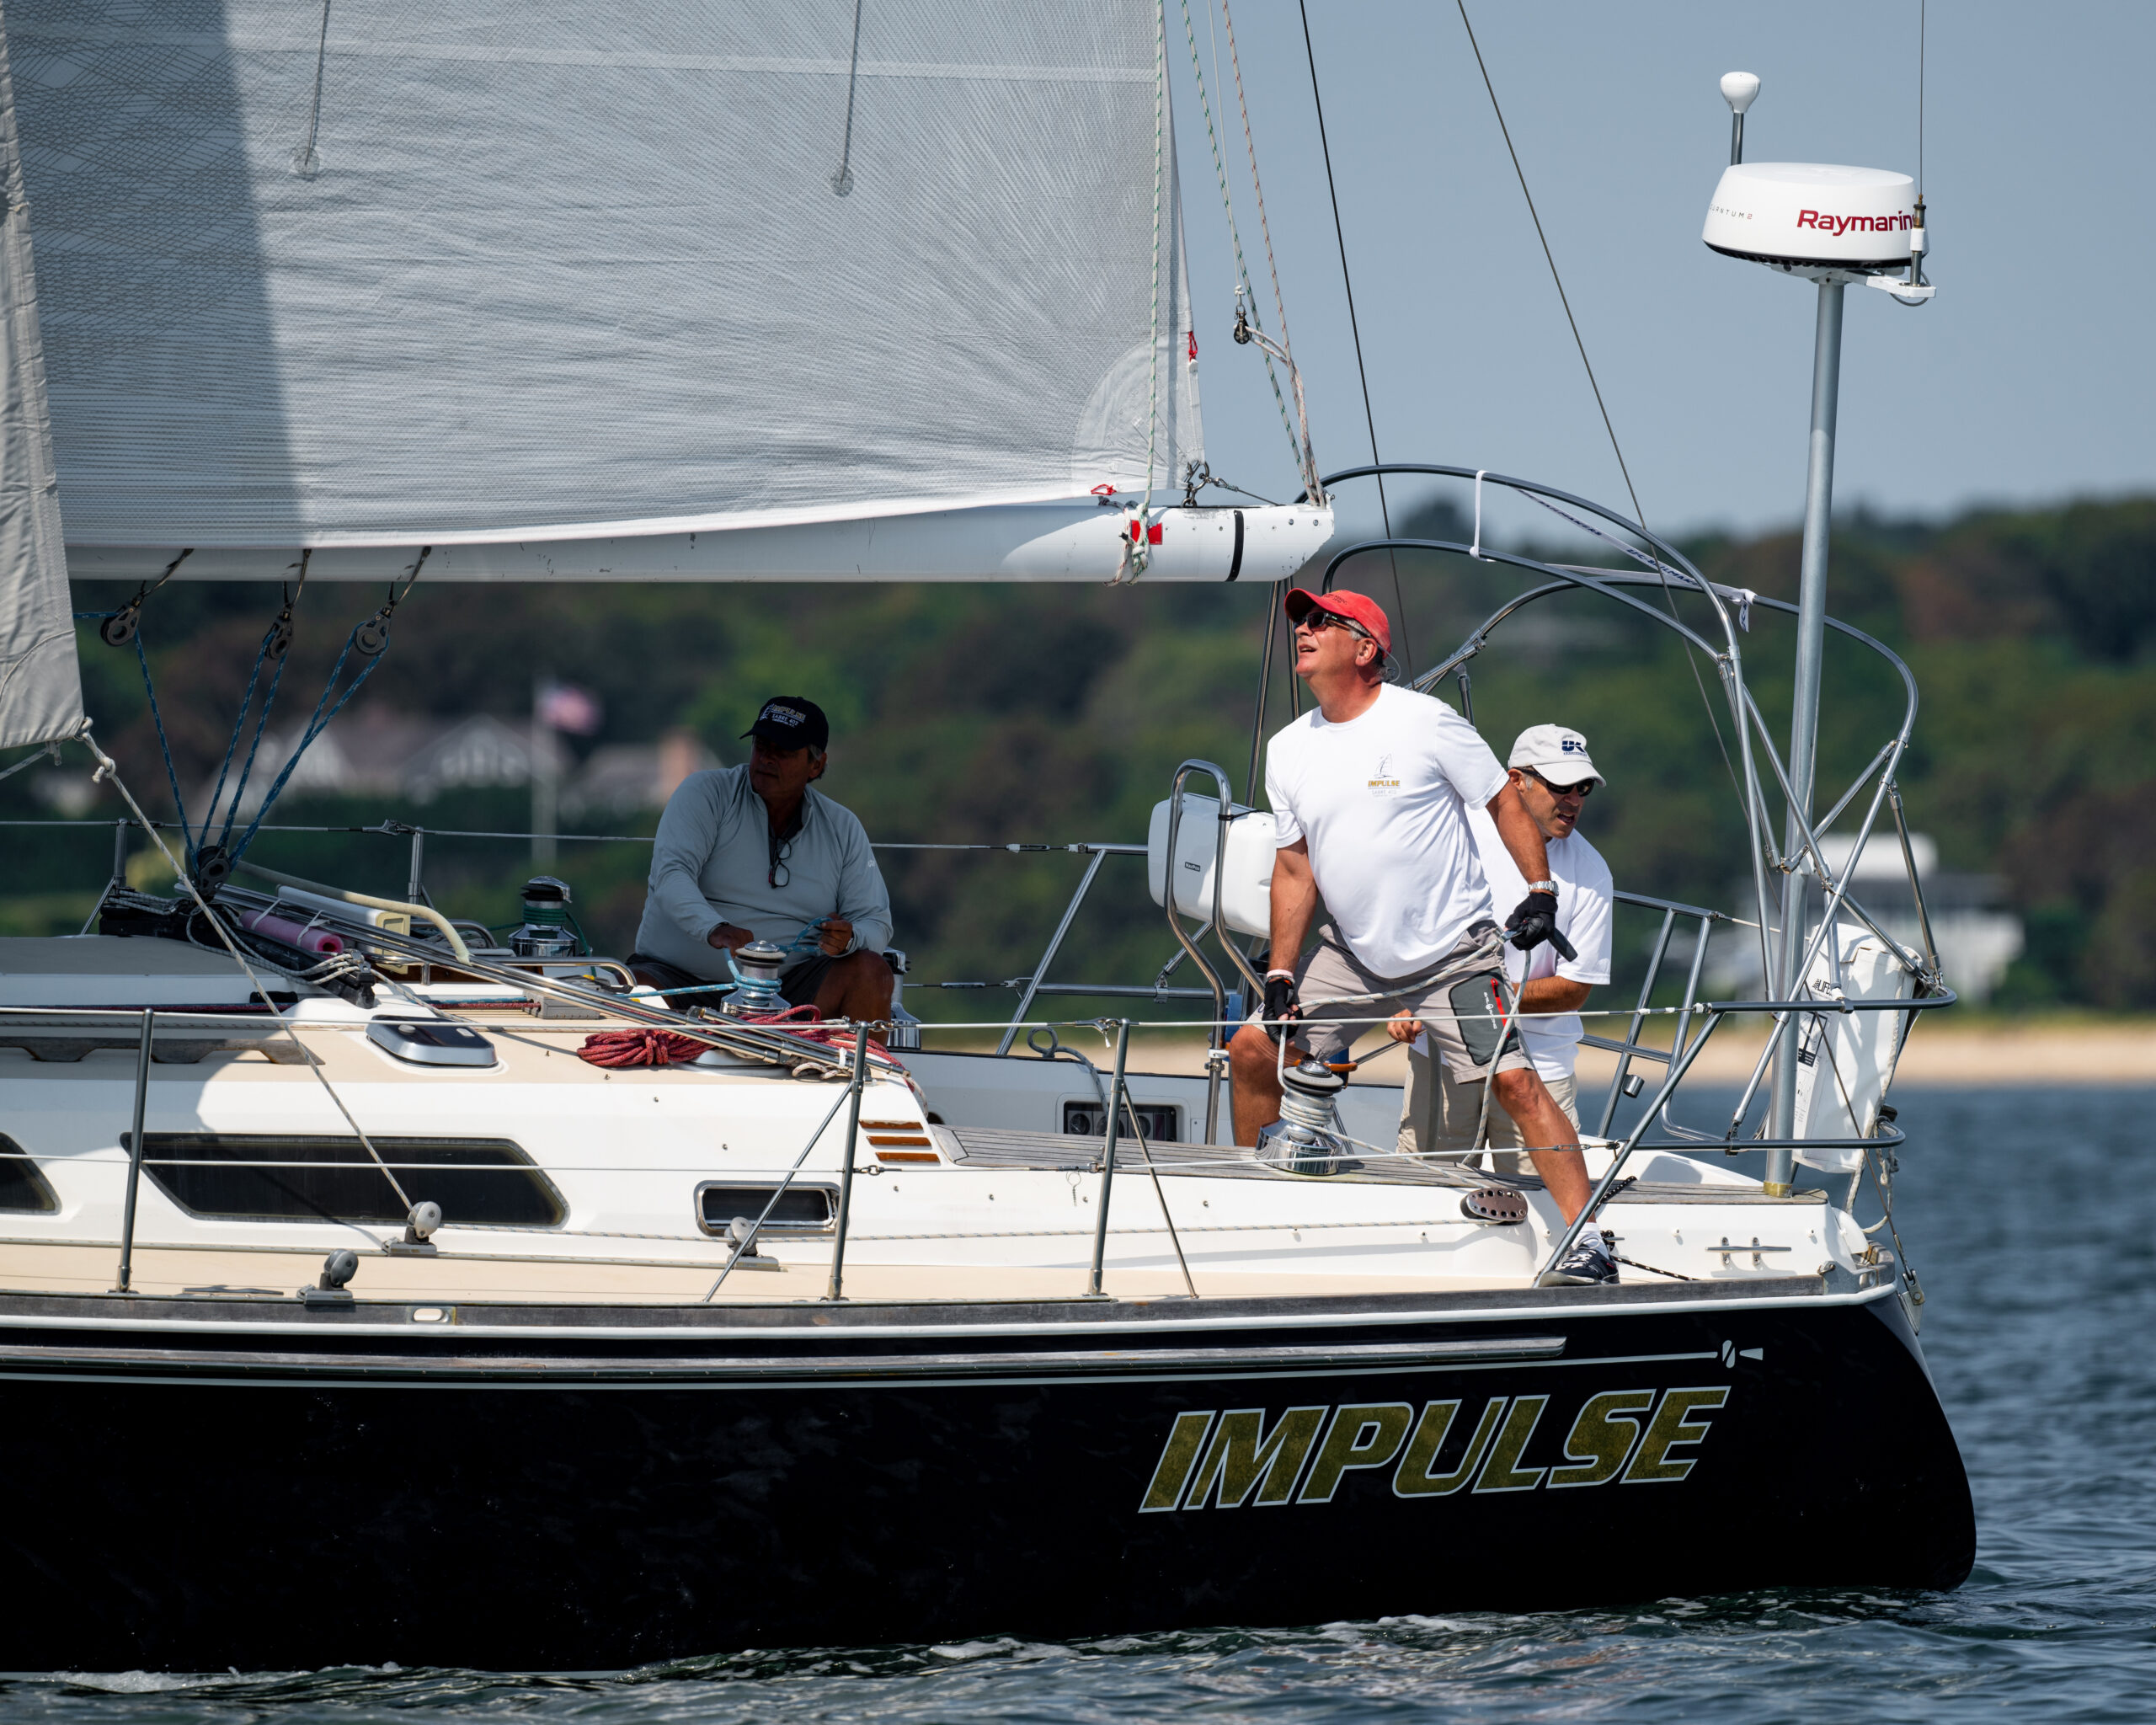 Members of Impulse, skippered by Andrew Baris, check their sails.     GARY SENFT/EASTENDMARINEPHOTOGRAPHY.COM